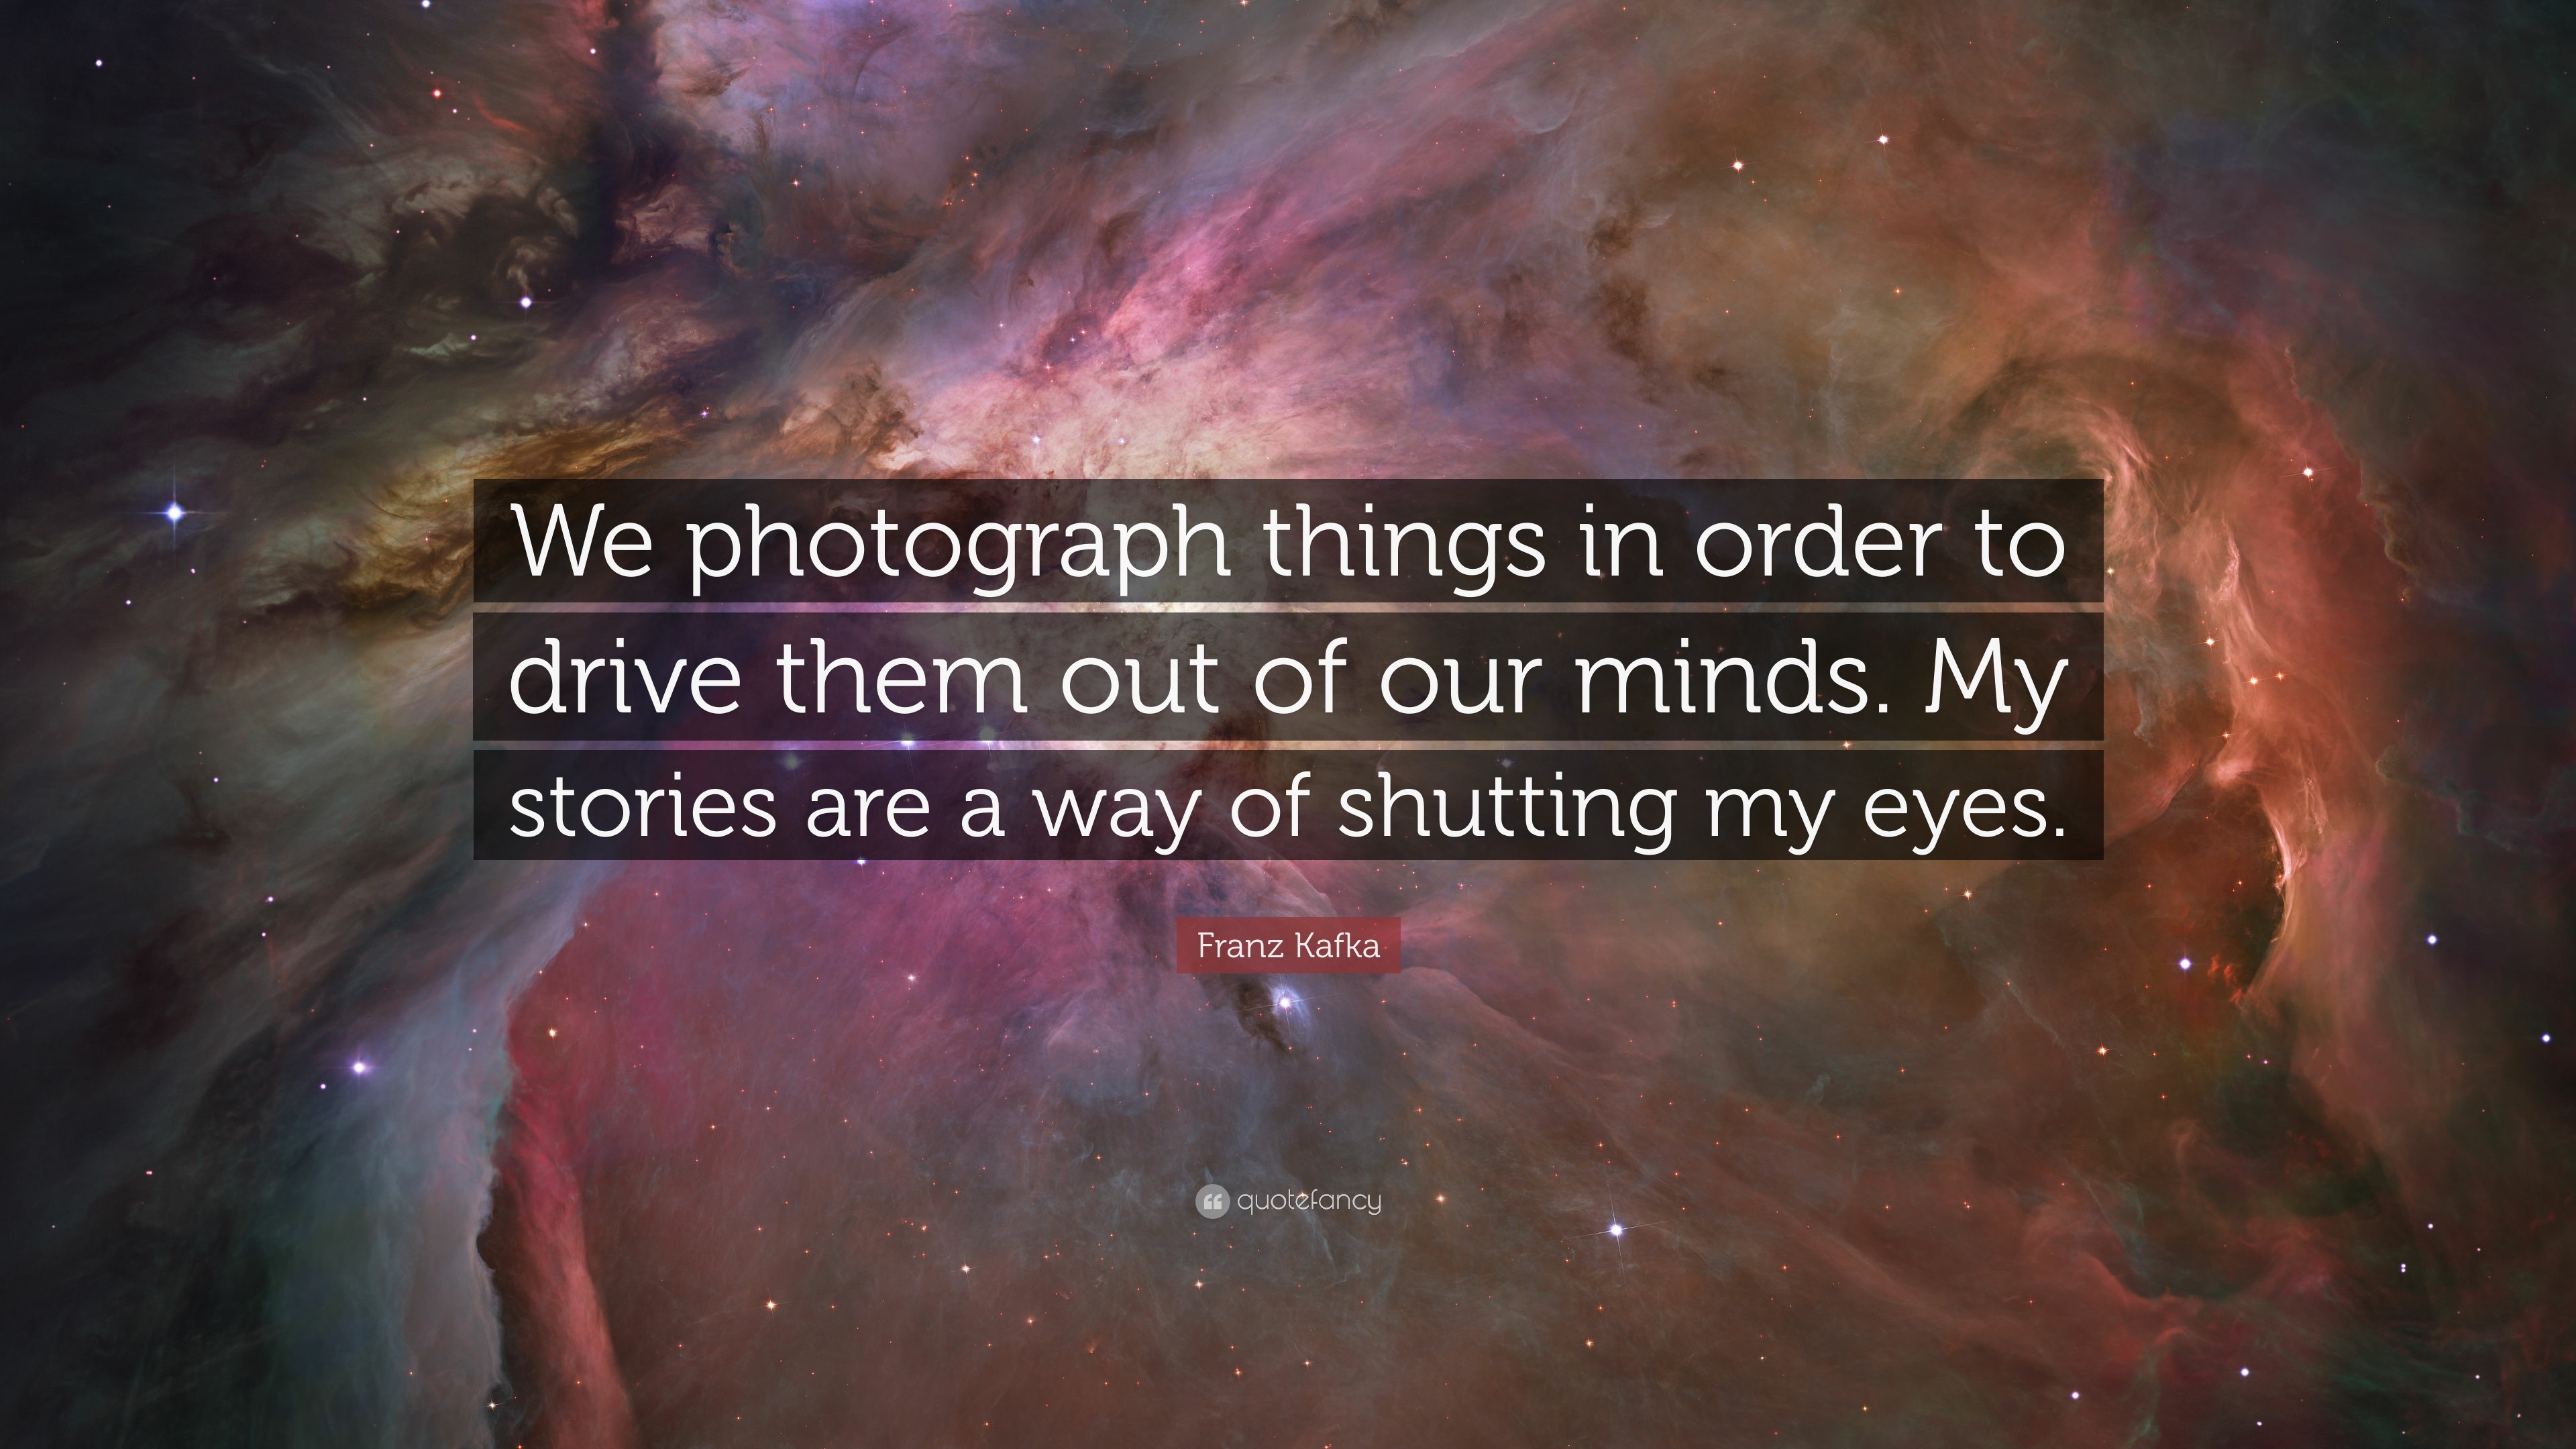 Franz Kafka Quote: “We photograph things in order to drive them out of ...